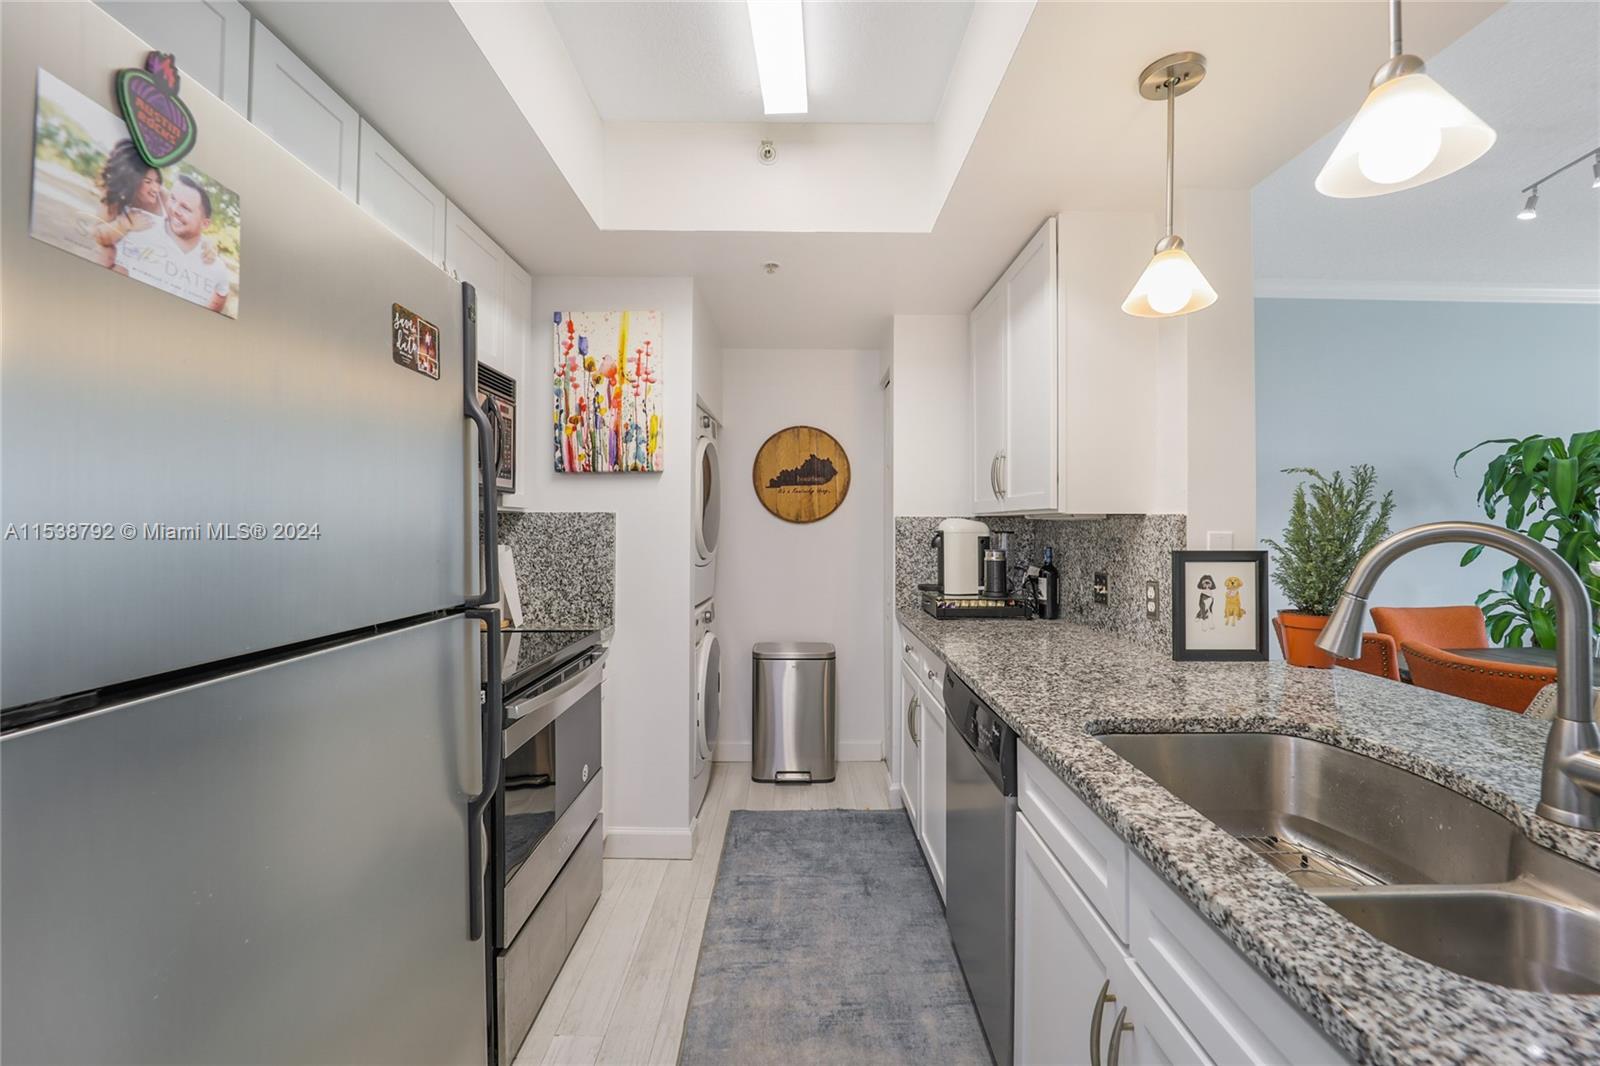 a kitchen with stainless steel appliances granite countertop a refrigerator a oven and a sink